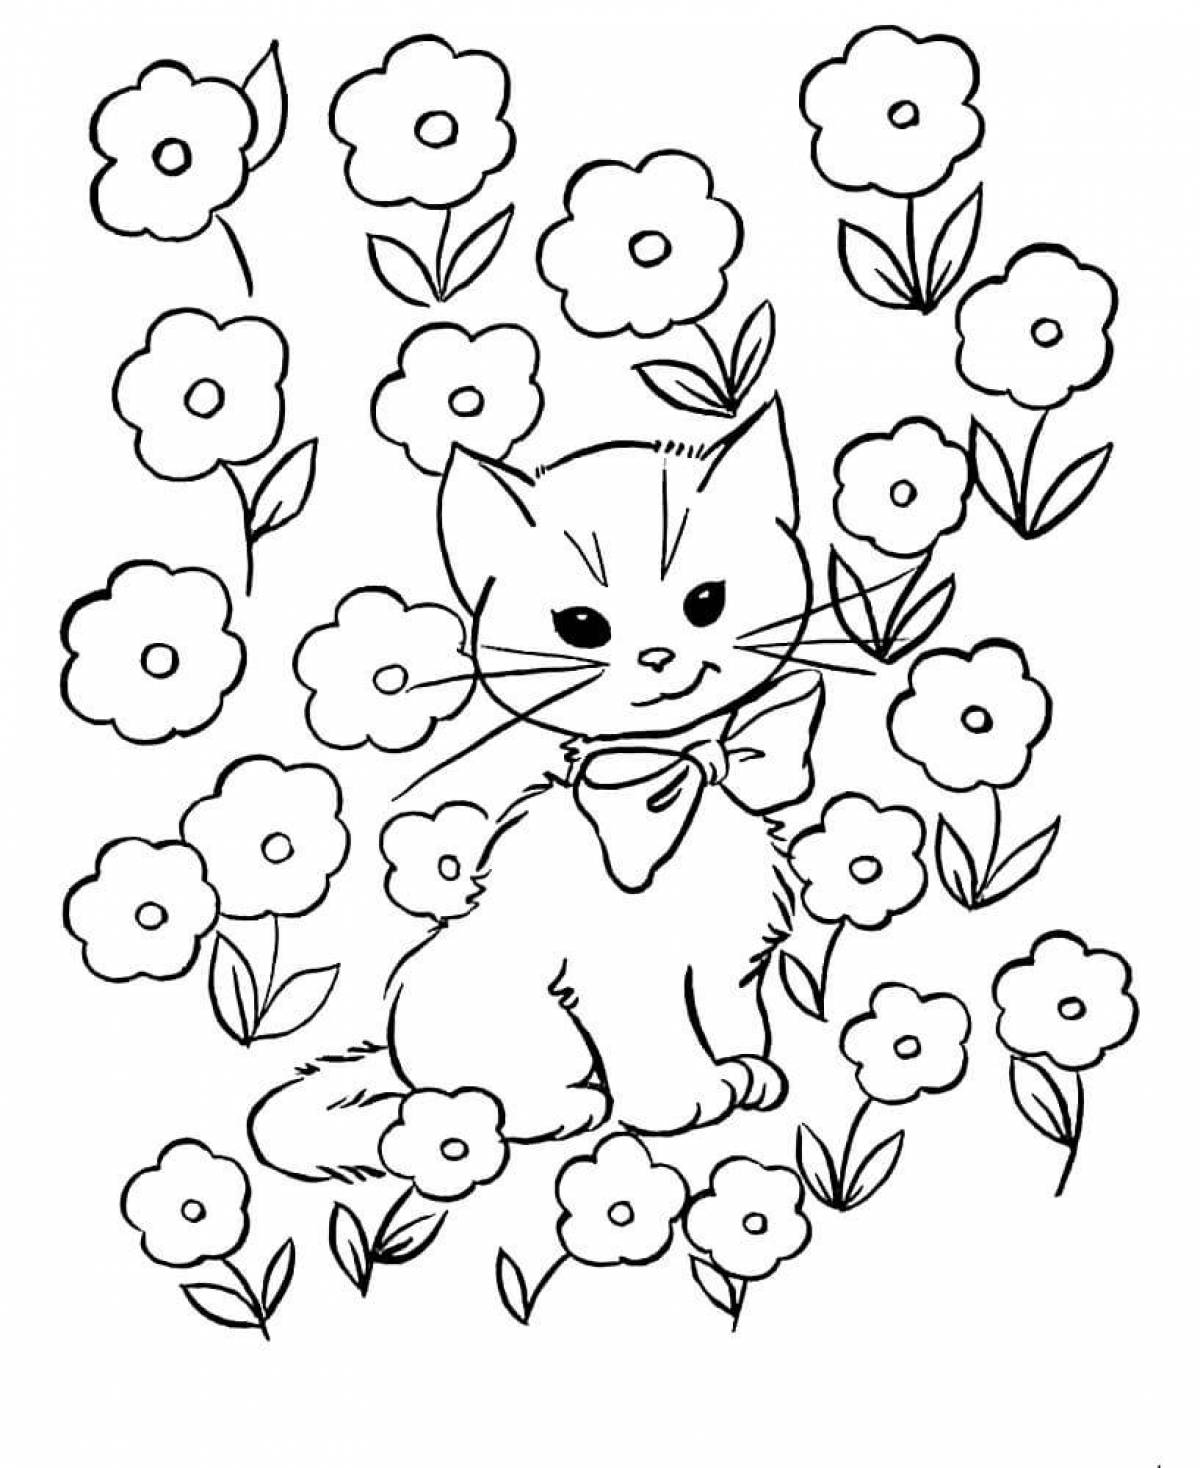 Wiggly kitten coloring book for kids